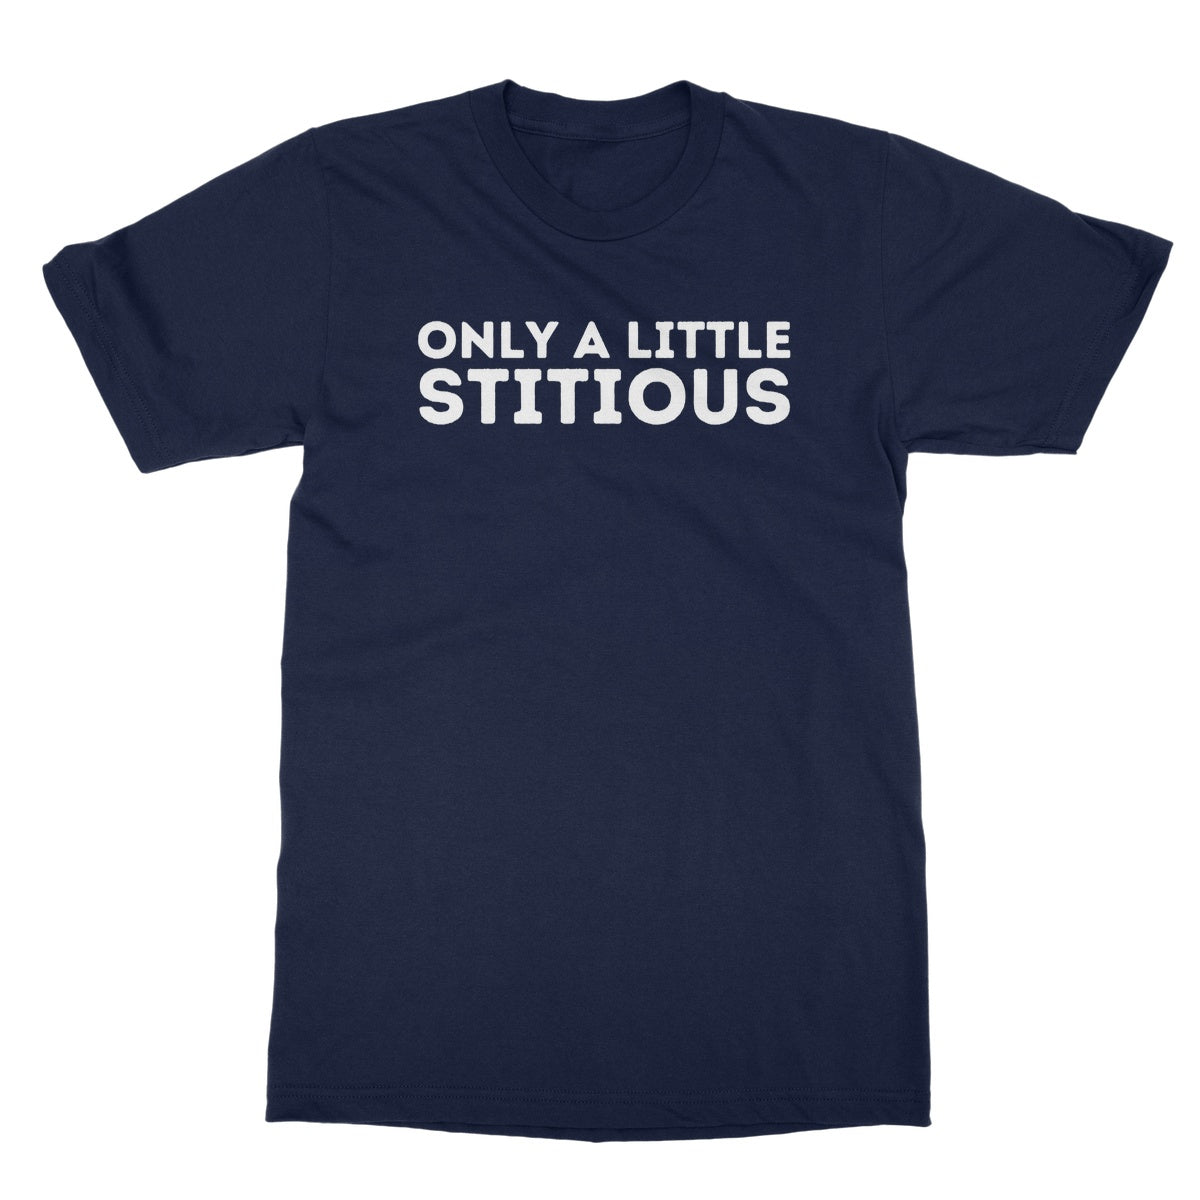 only a little stitious t shirt navy